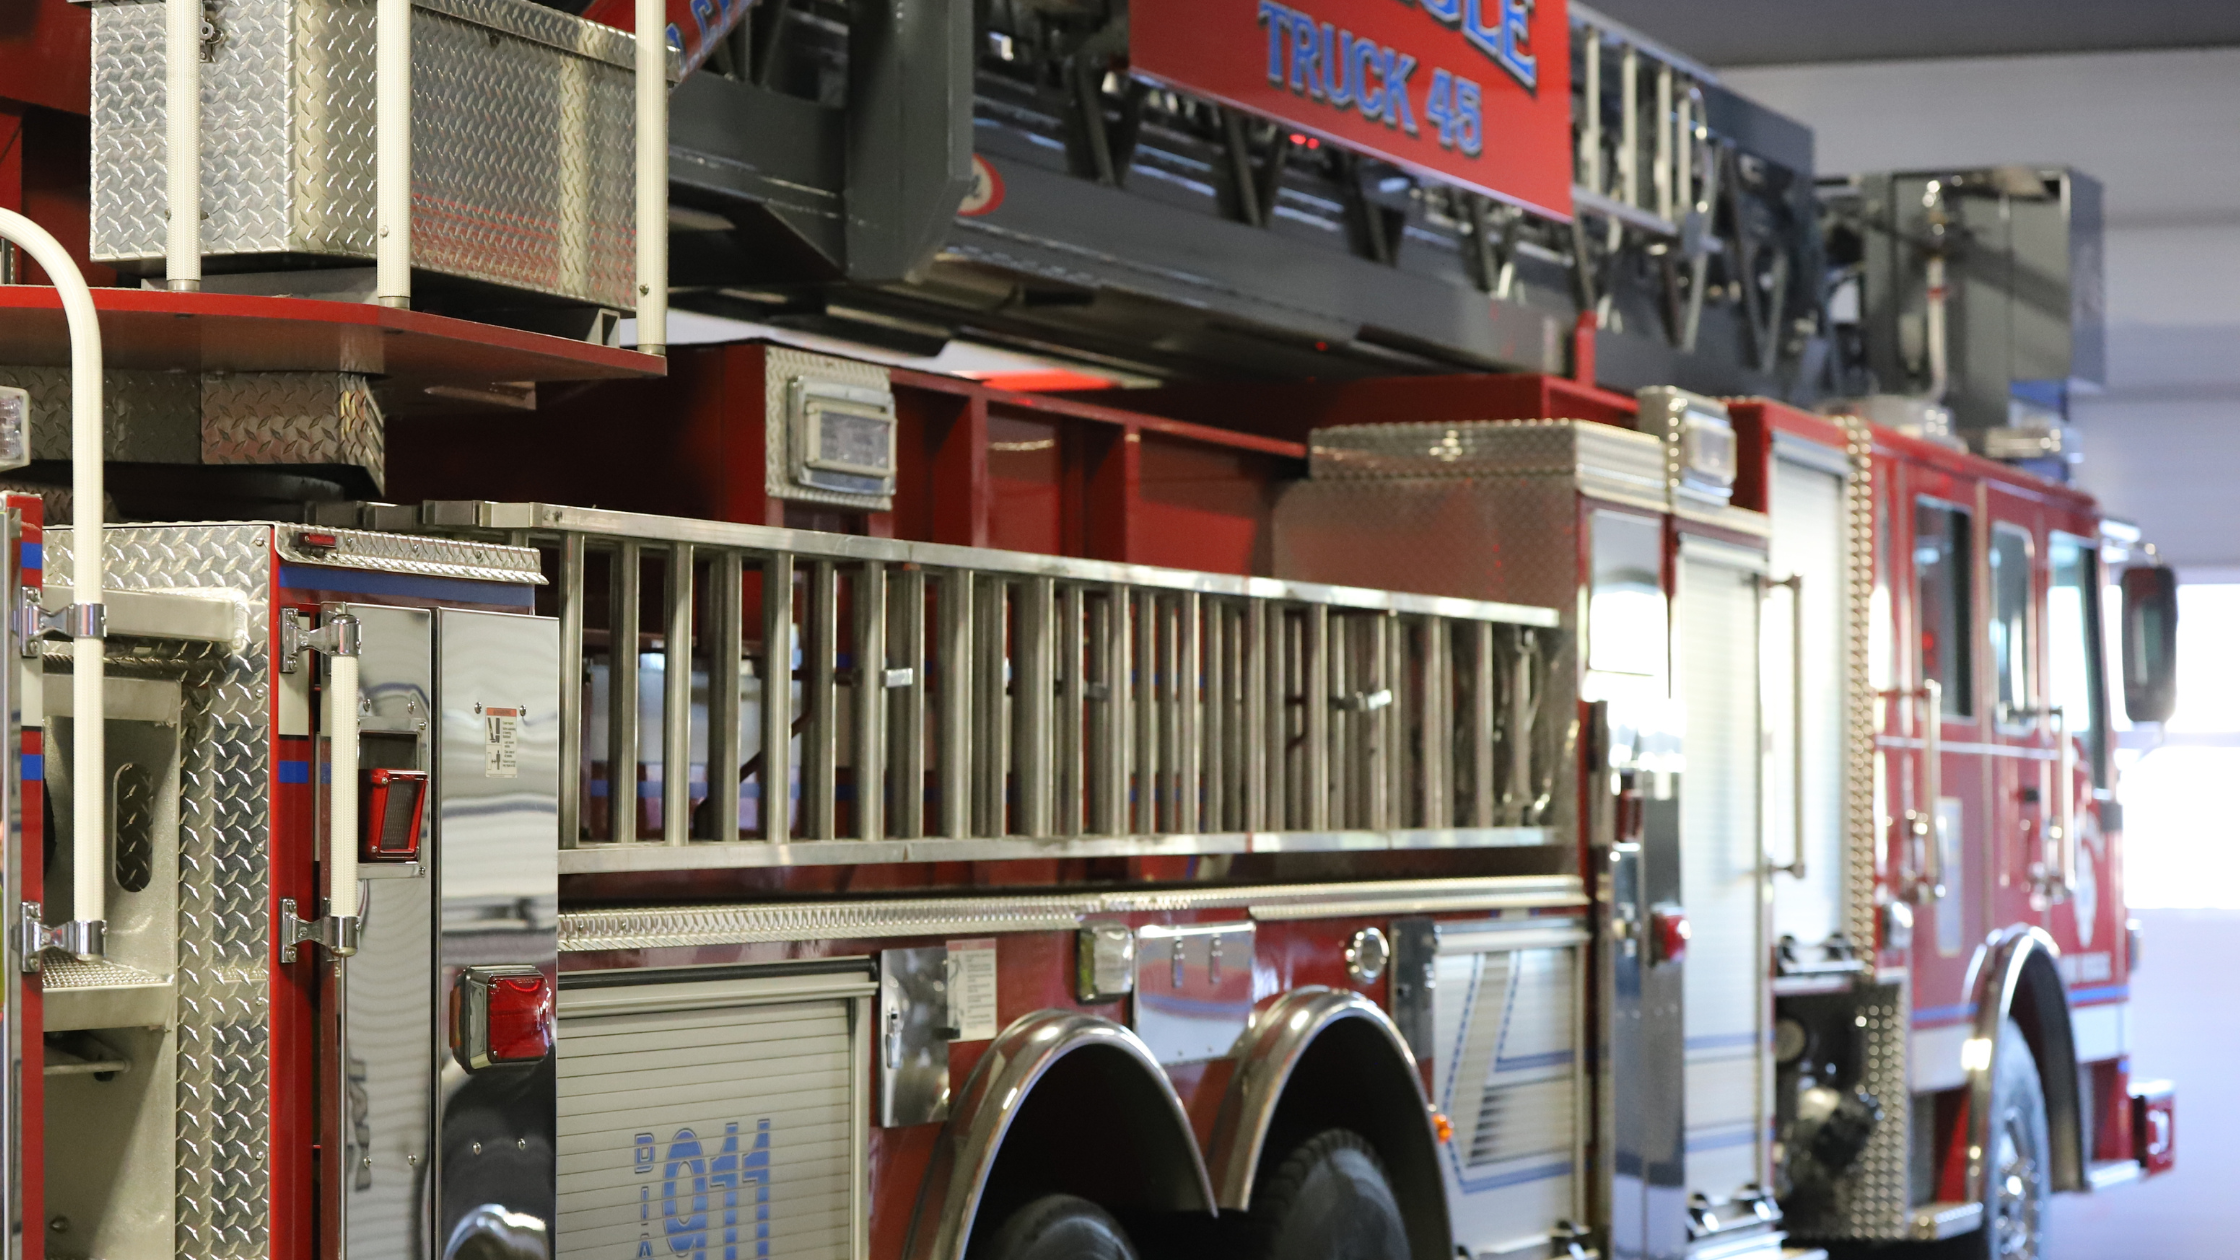 A detailed photo of a firetruck parked in a fire station